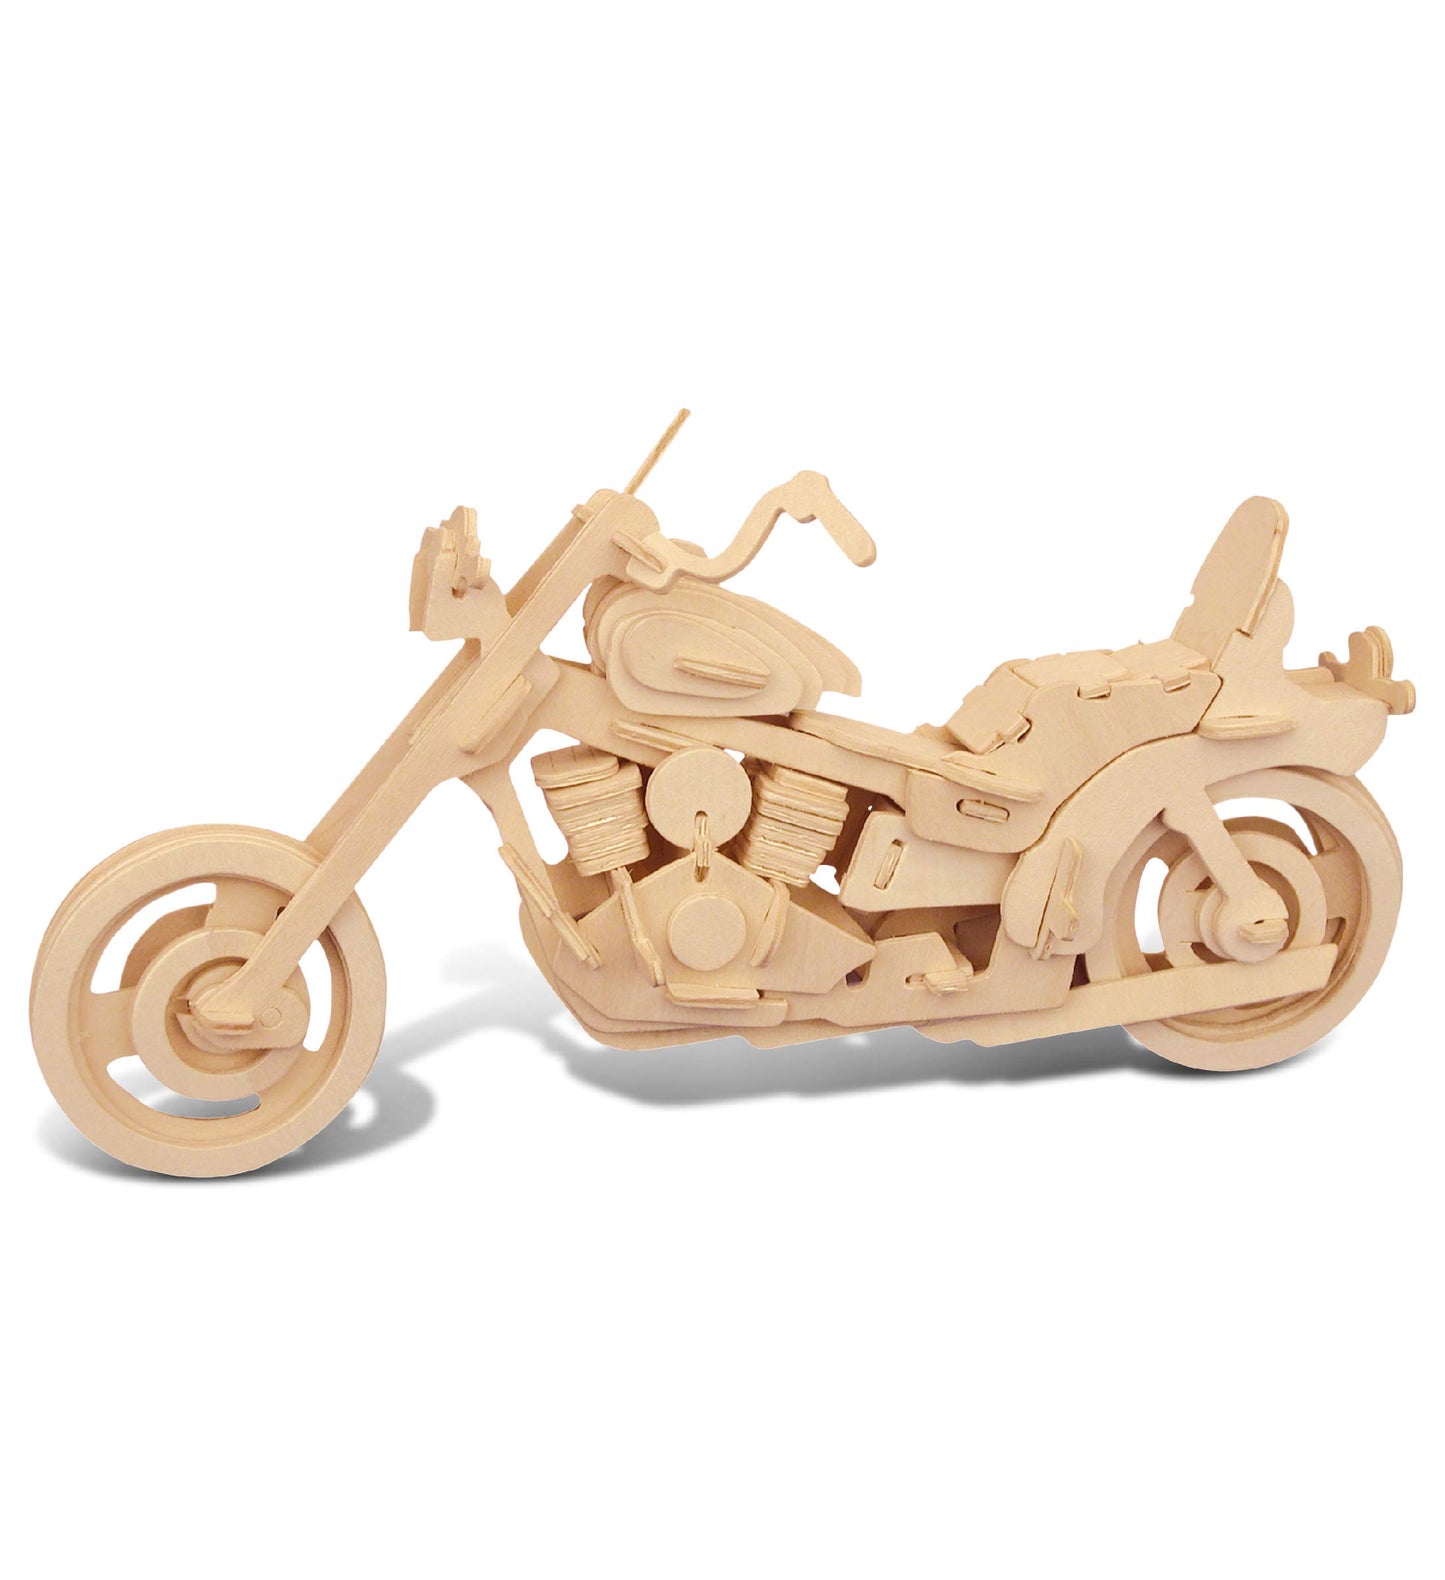 Puzzled 3D Puzzle Motorcycle Wood Craft Construction Model Kit, Fun & Educational DIY Wooden Toy Assemble Model Unfinished Crafting Hobby Puzzle to